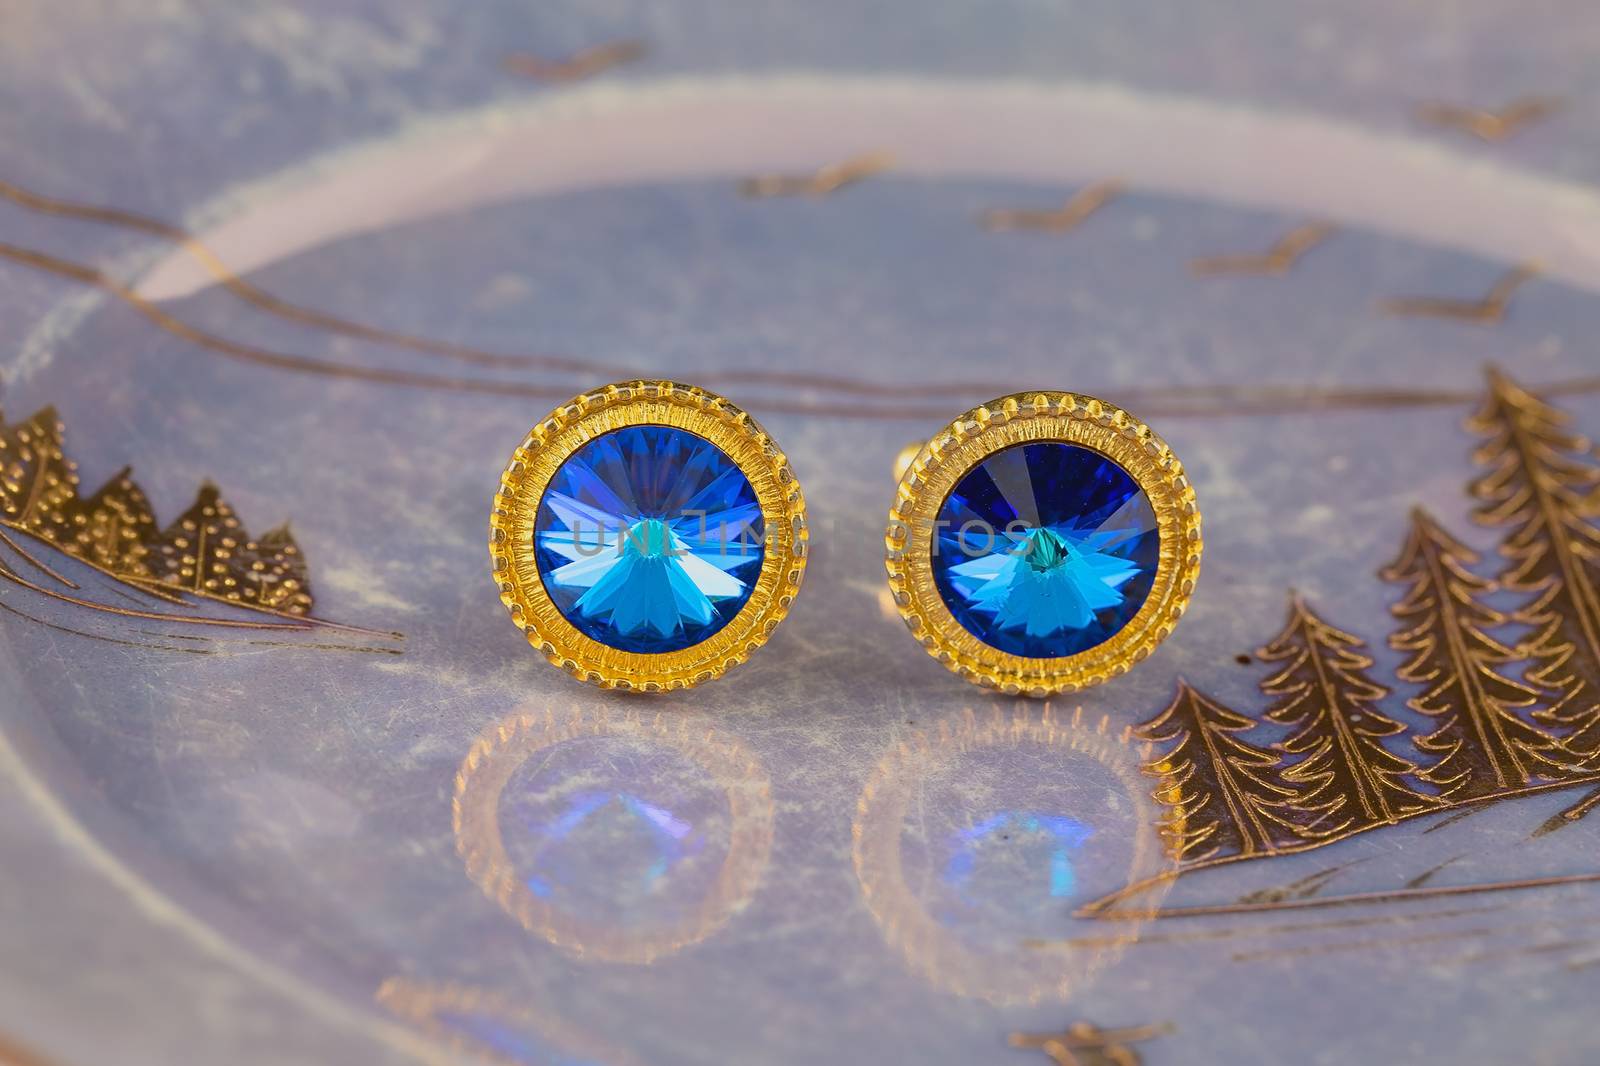 Vintage large gold blue stone cuff links on a lustrous plate